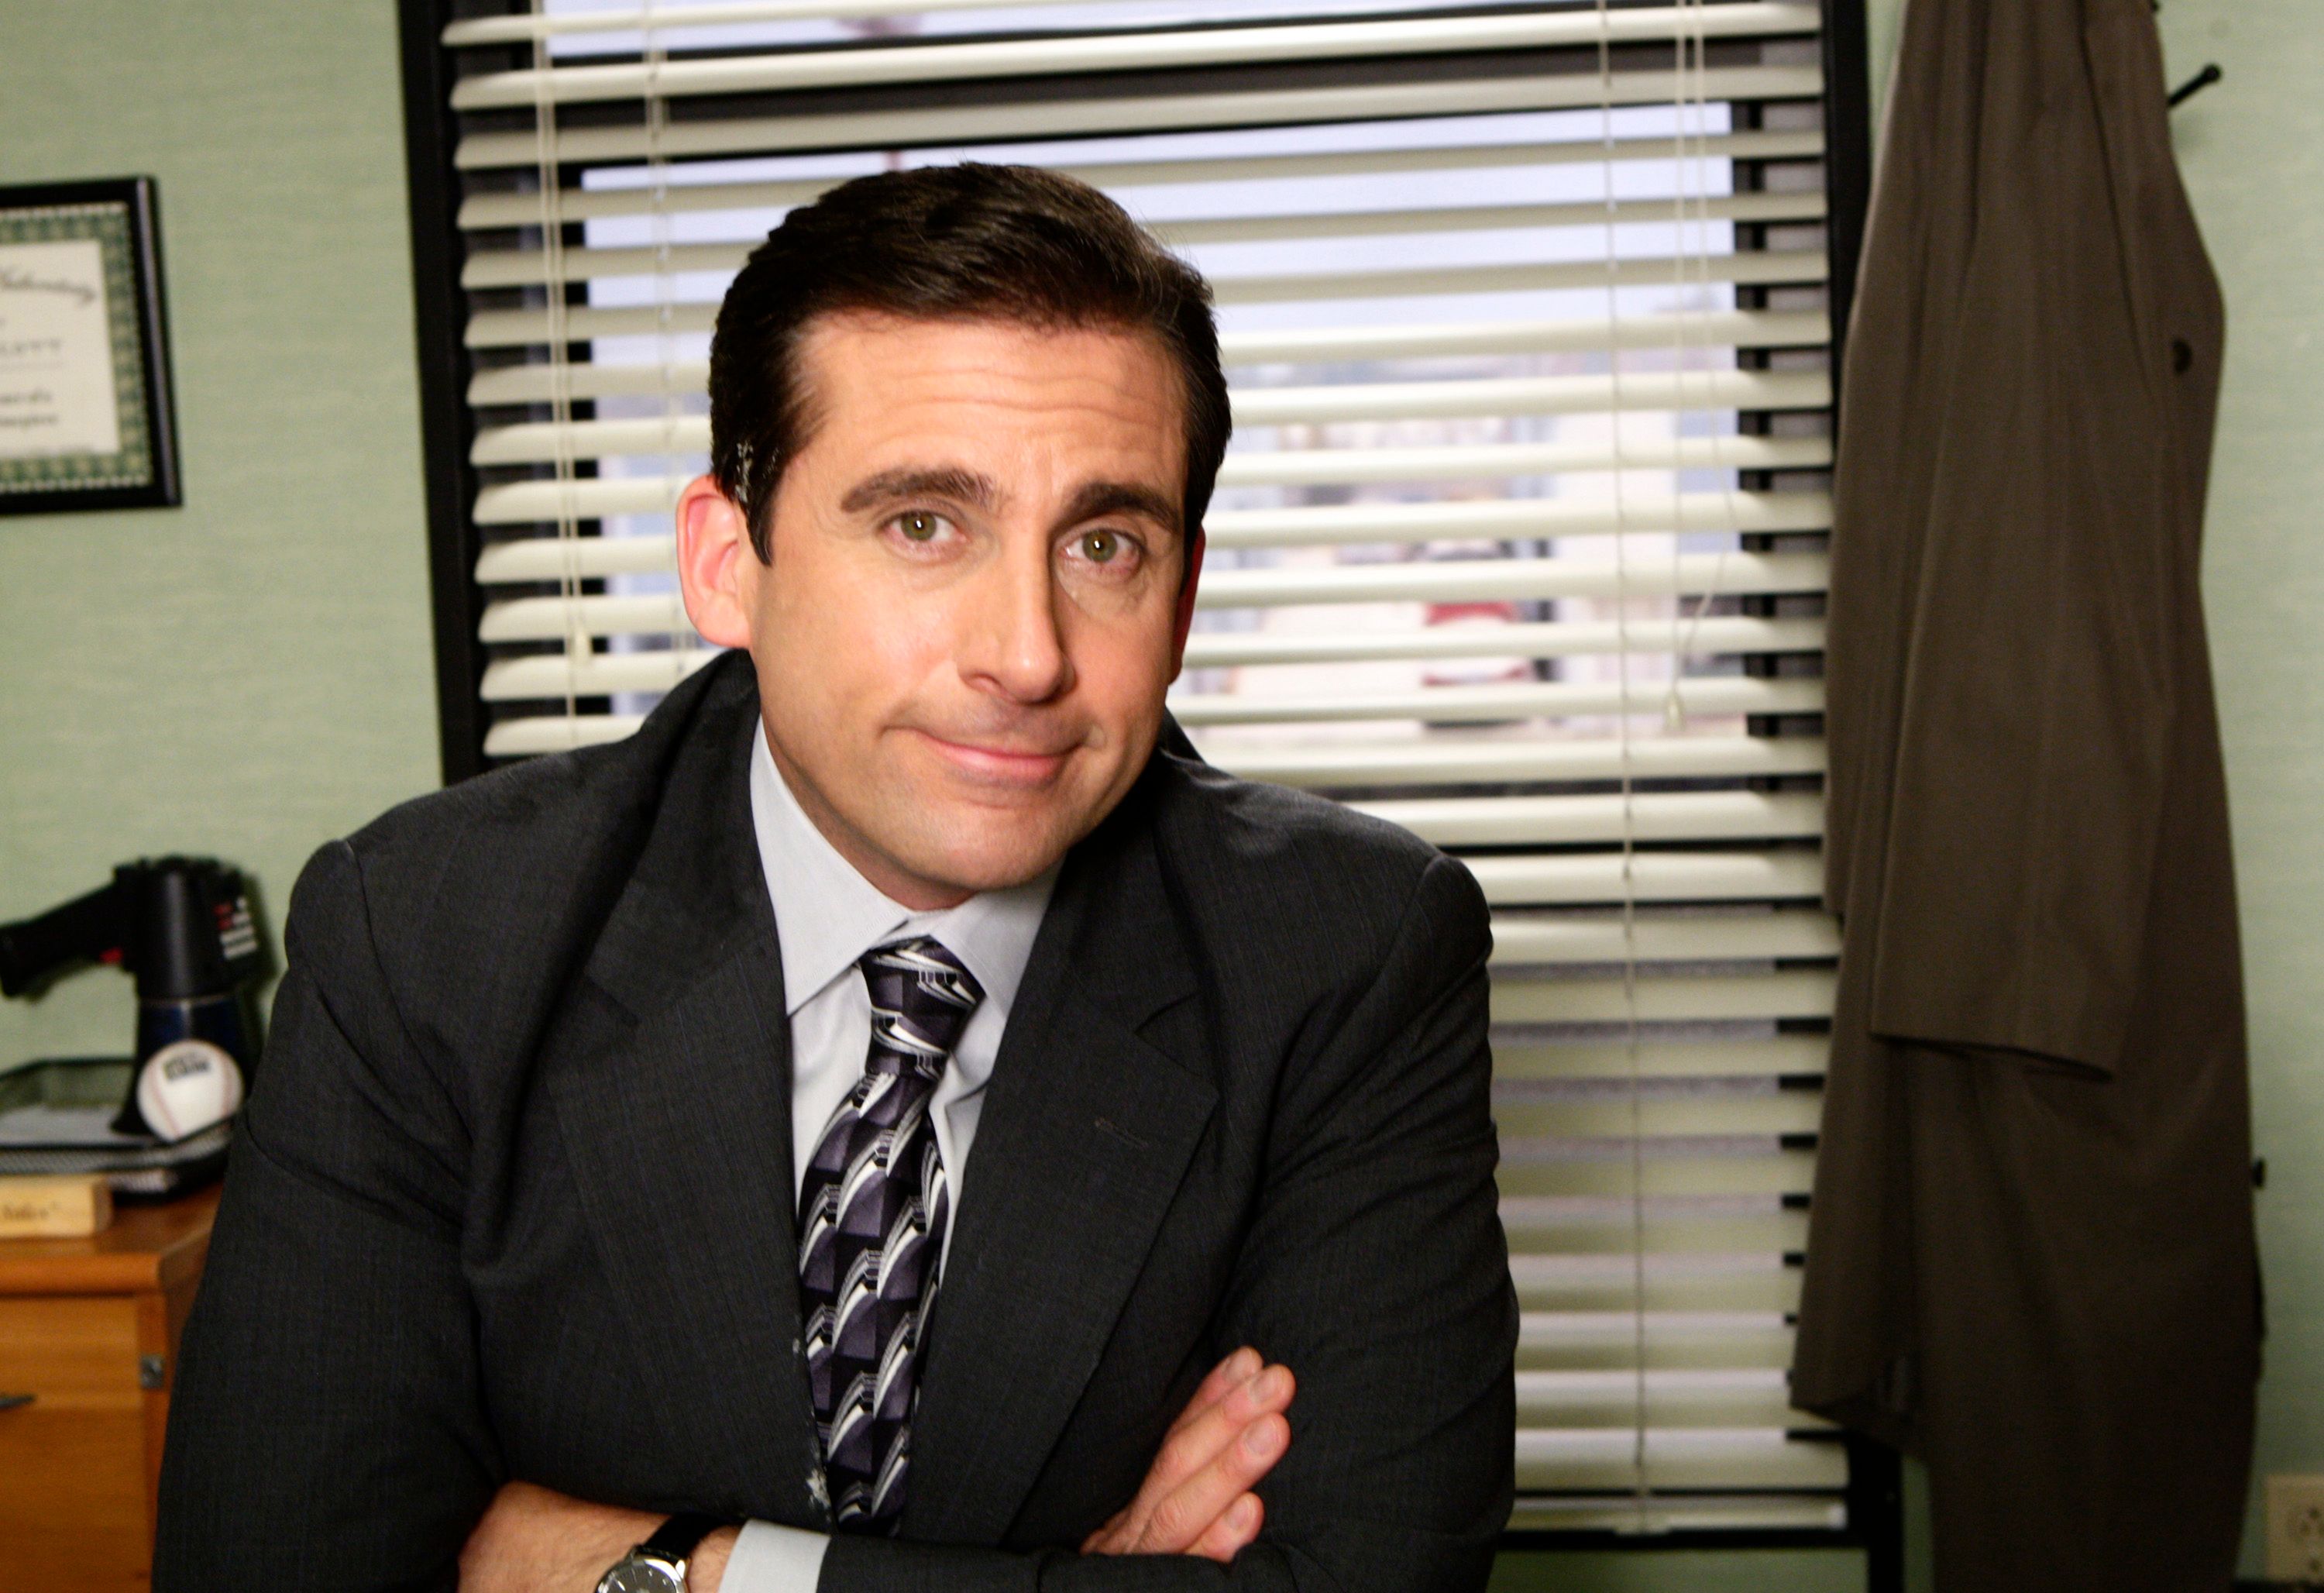 Steve Carell on "The Office" Episode 4016 Titled "Did I Stutter" on May 1, 2008 | Source: Getty Images